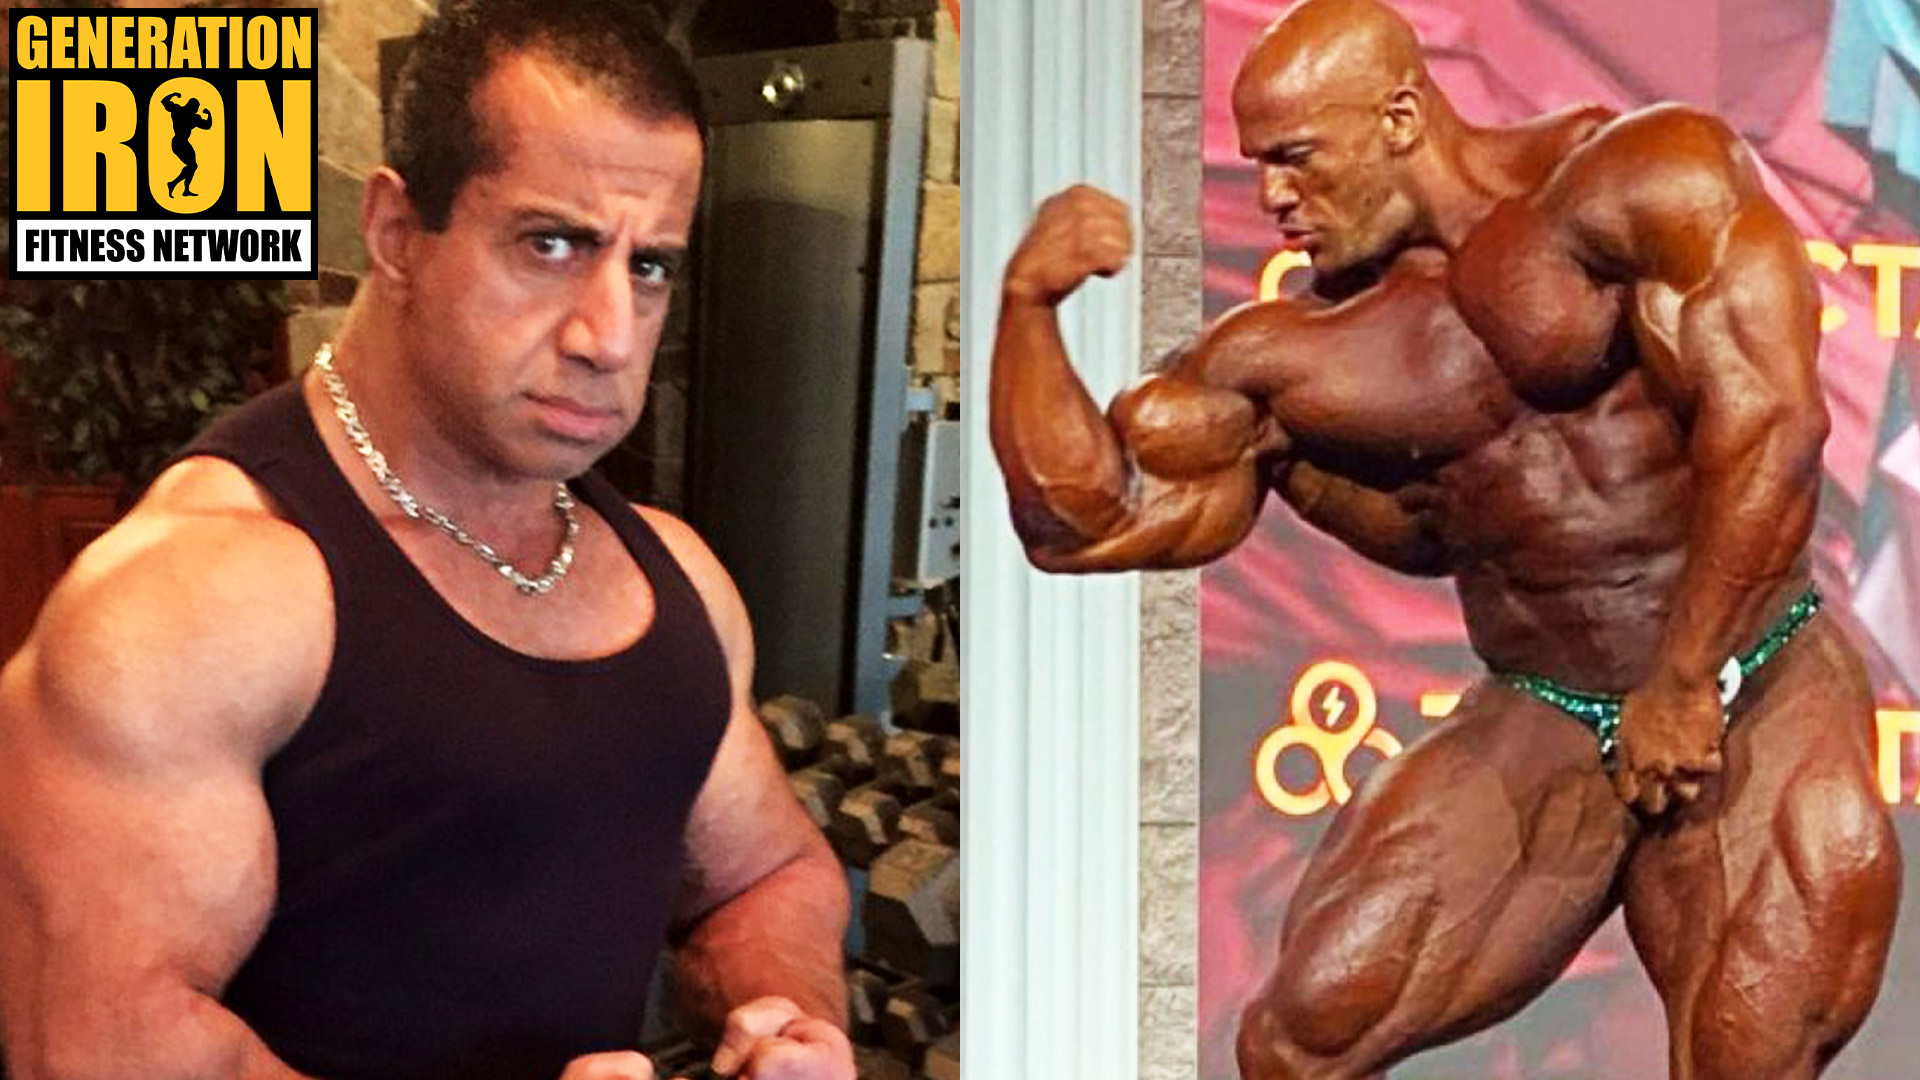 George Farah: I Could Have Gotten Big Ramy The Mr. Olympia Sooner